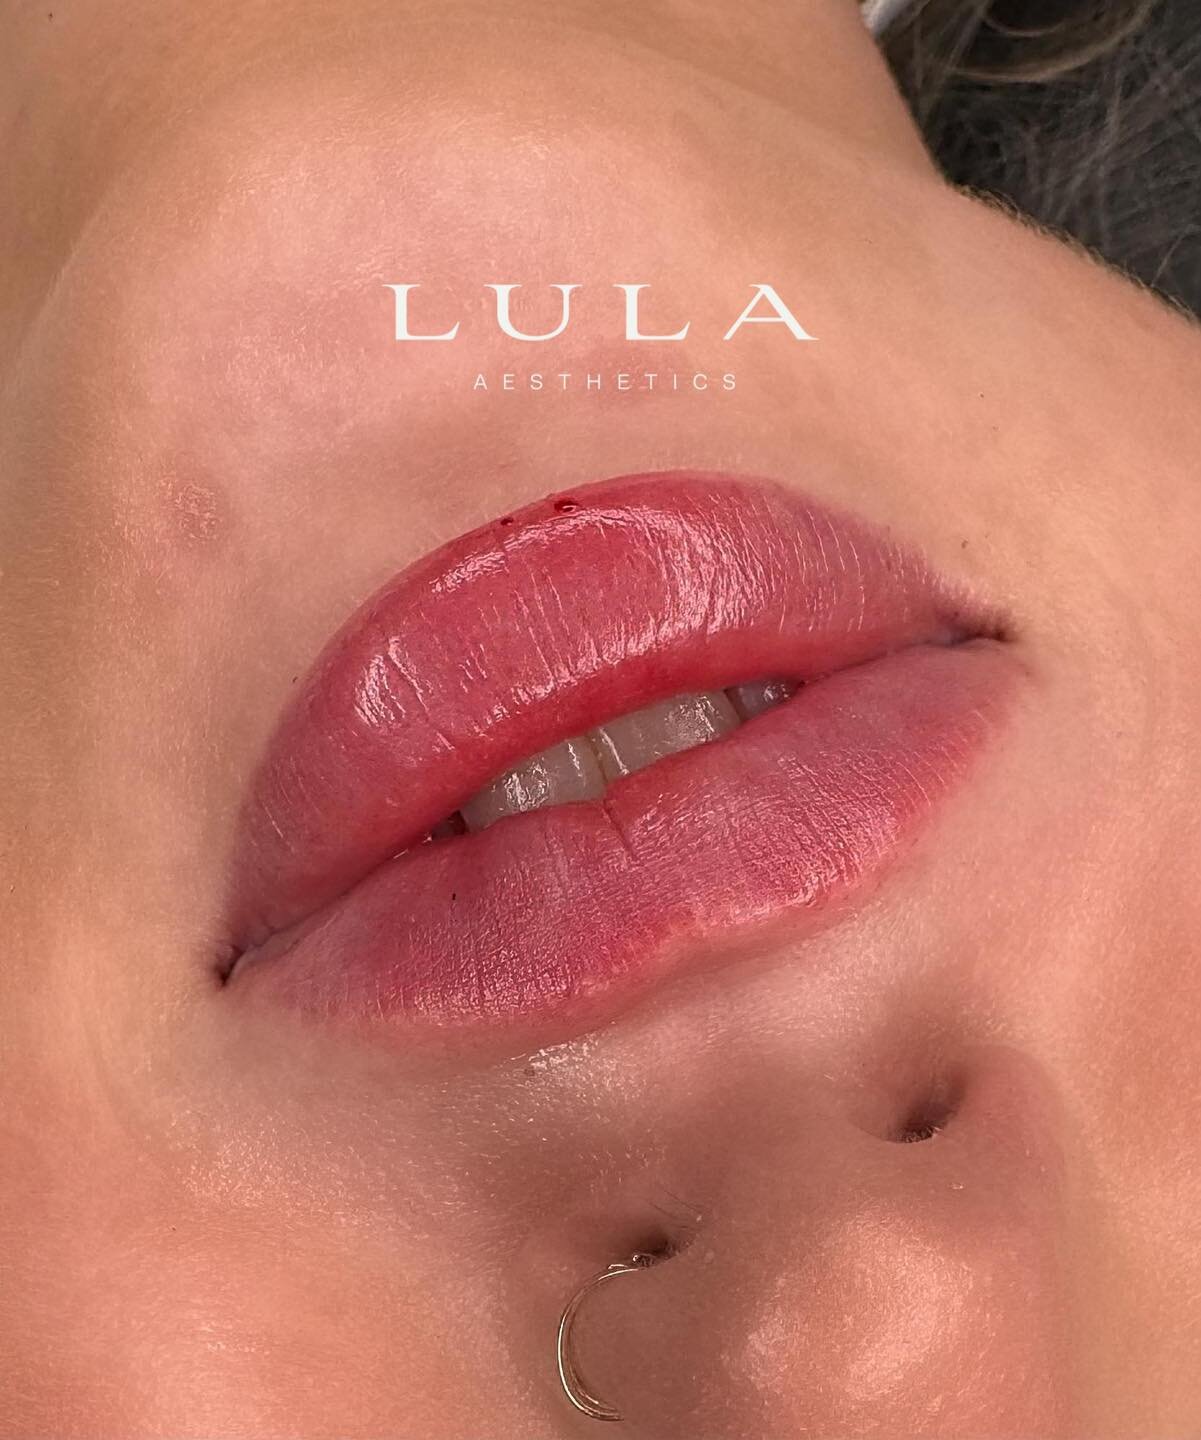 Progressive treatments = best results. 

Further flattening the inferior of the lip to create lift + recreate lip shape. 

Tight M shape lip &rarr; full lips. 

Treatment by Registered Nurse Mads. 

All cosmetic procedures come with risks and side ef